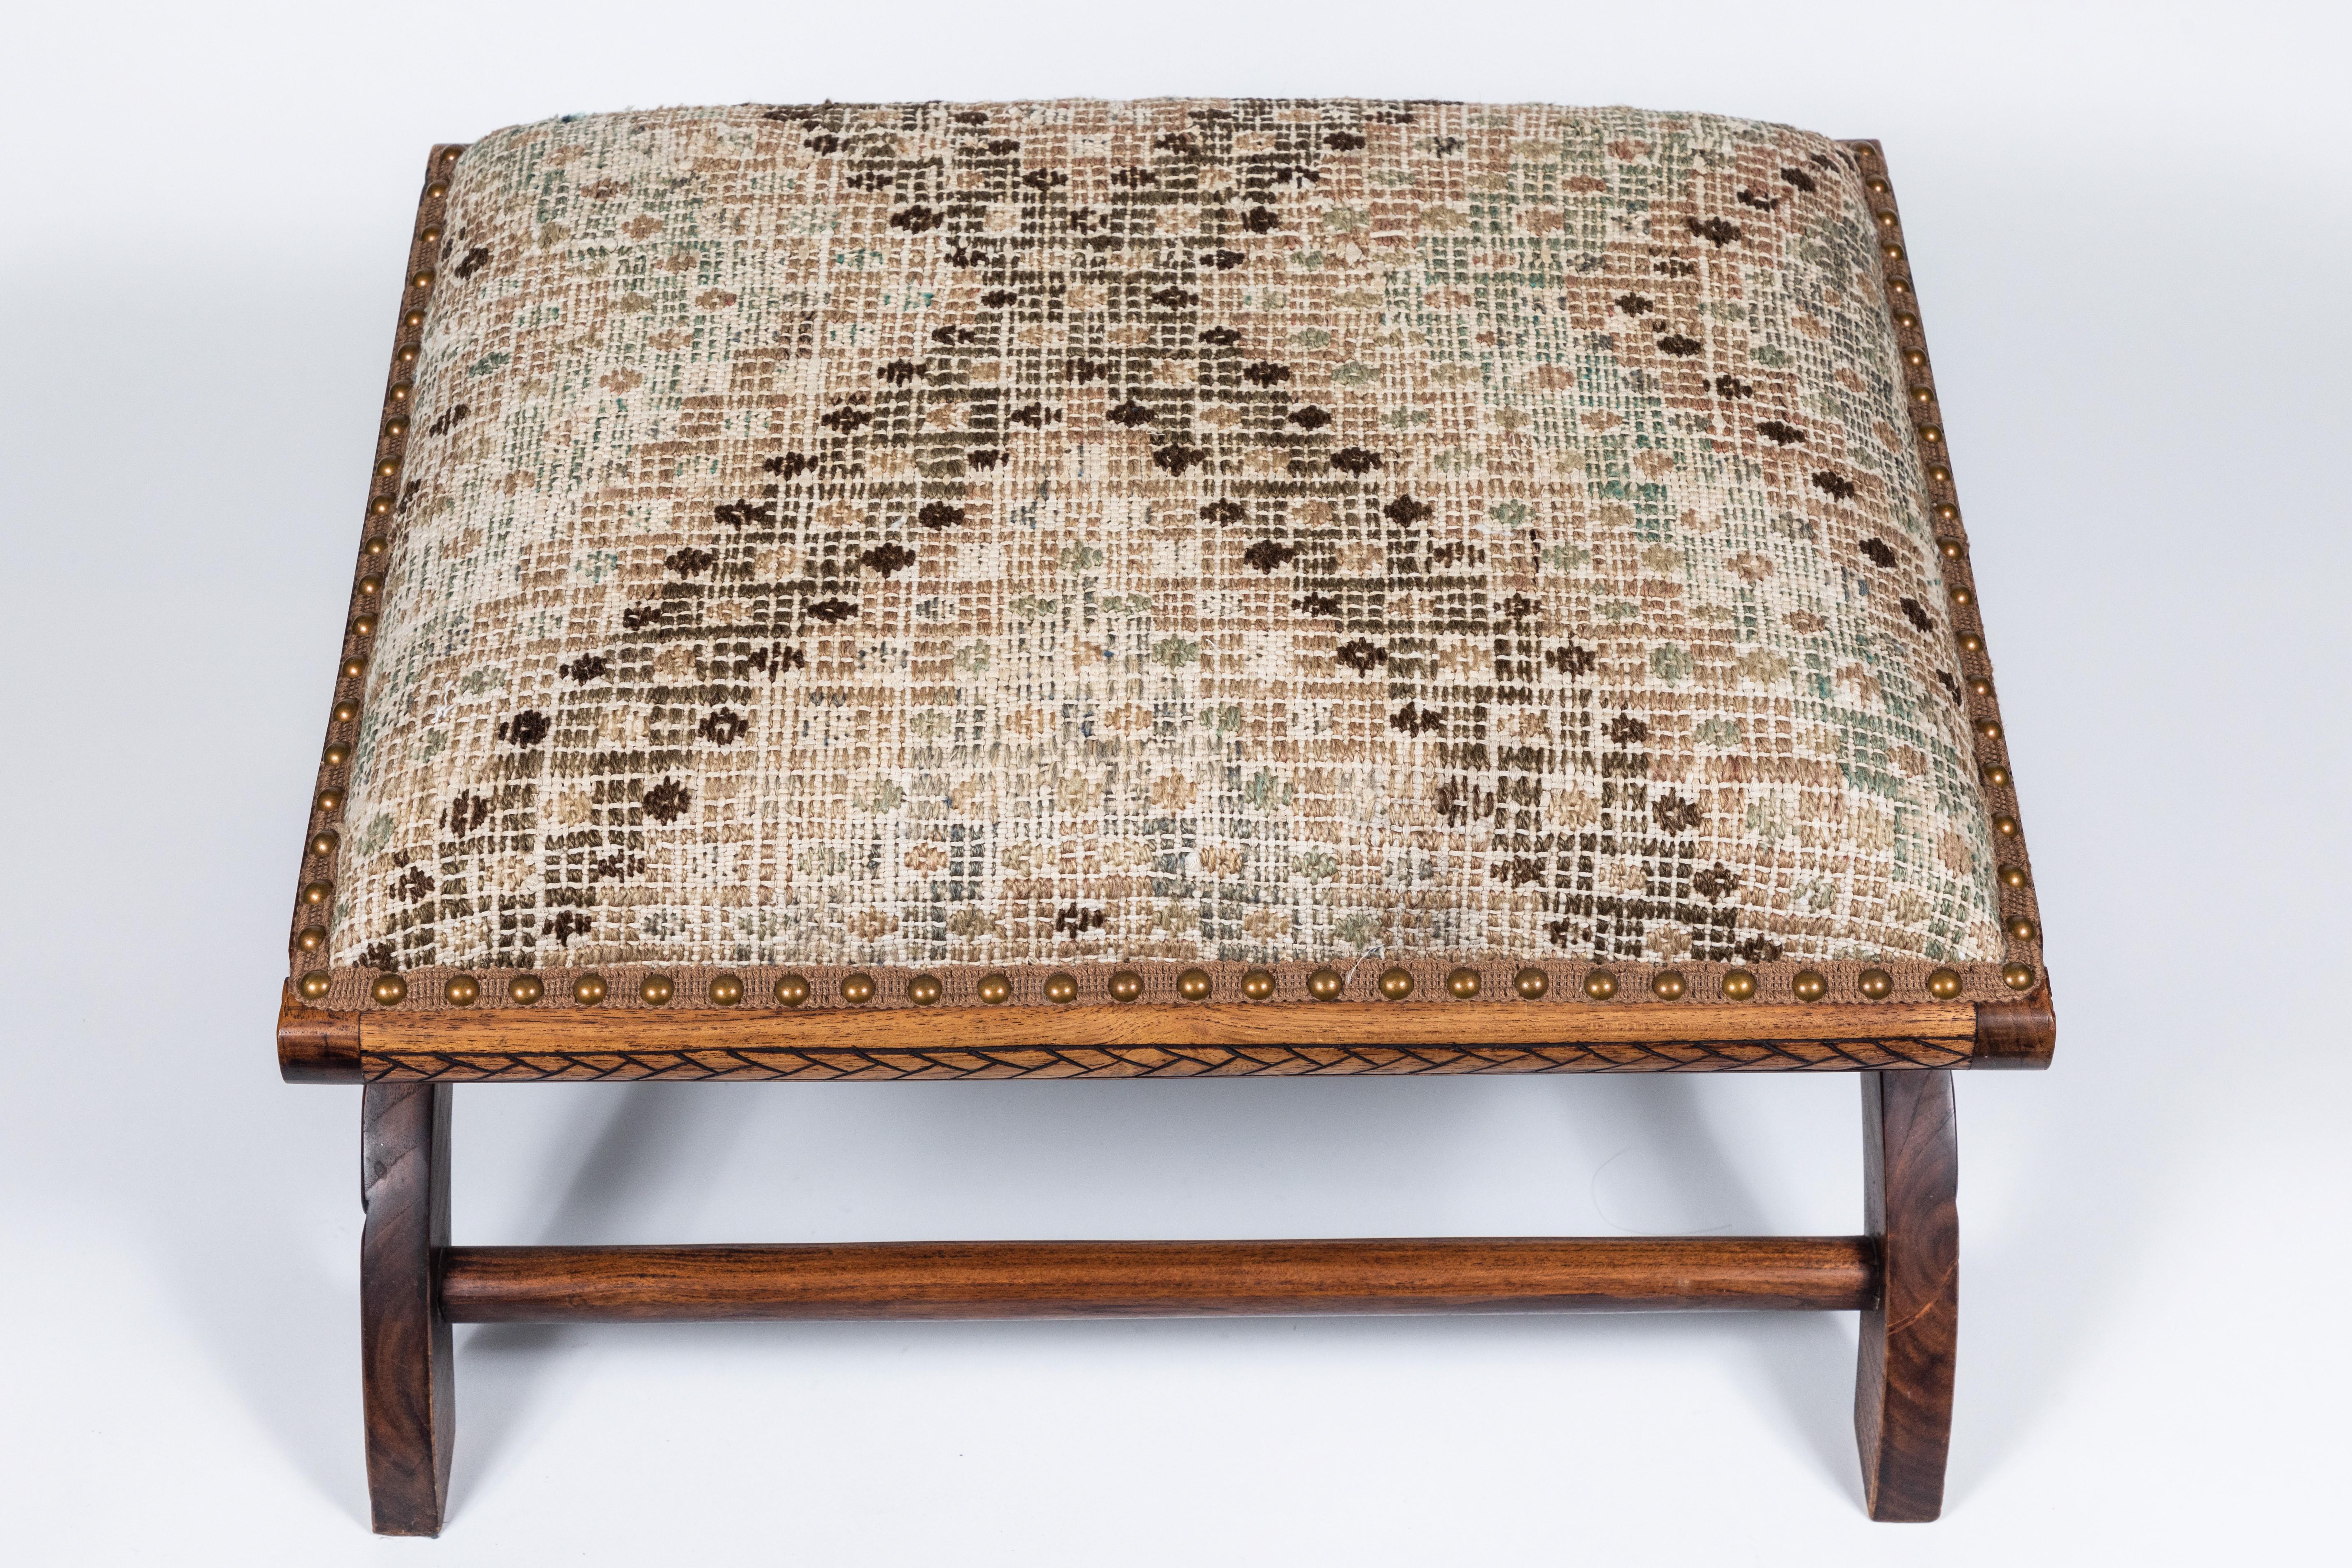 Antique wood footstool with carved flowers on the side, upholstered in a vintage Turkish rug with nailhead trim.